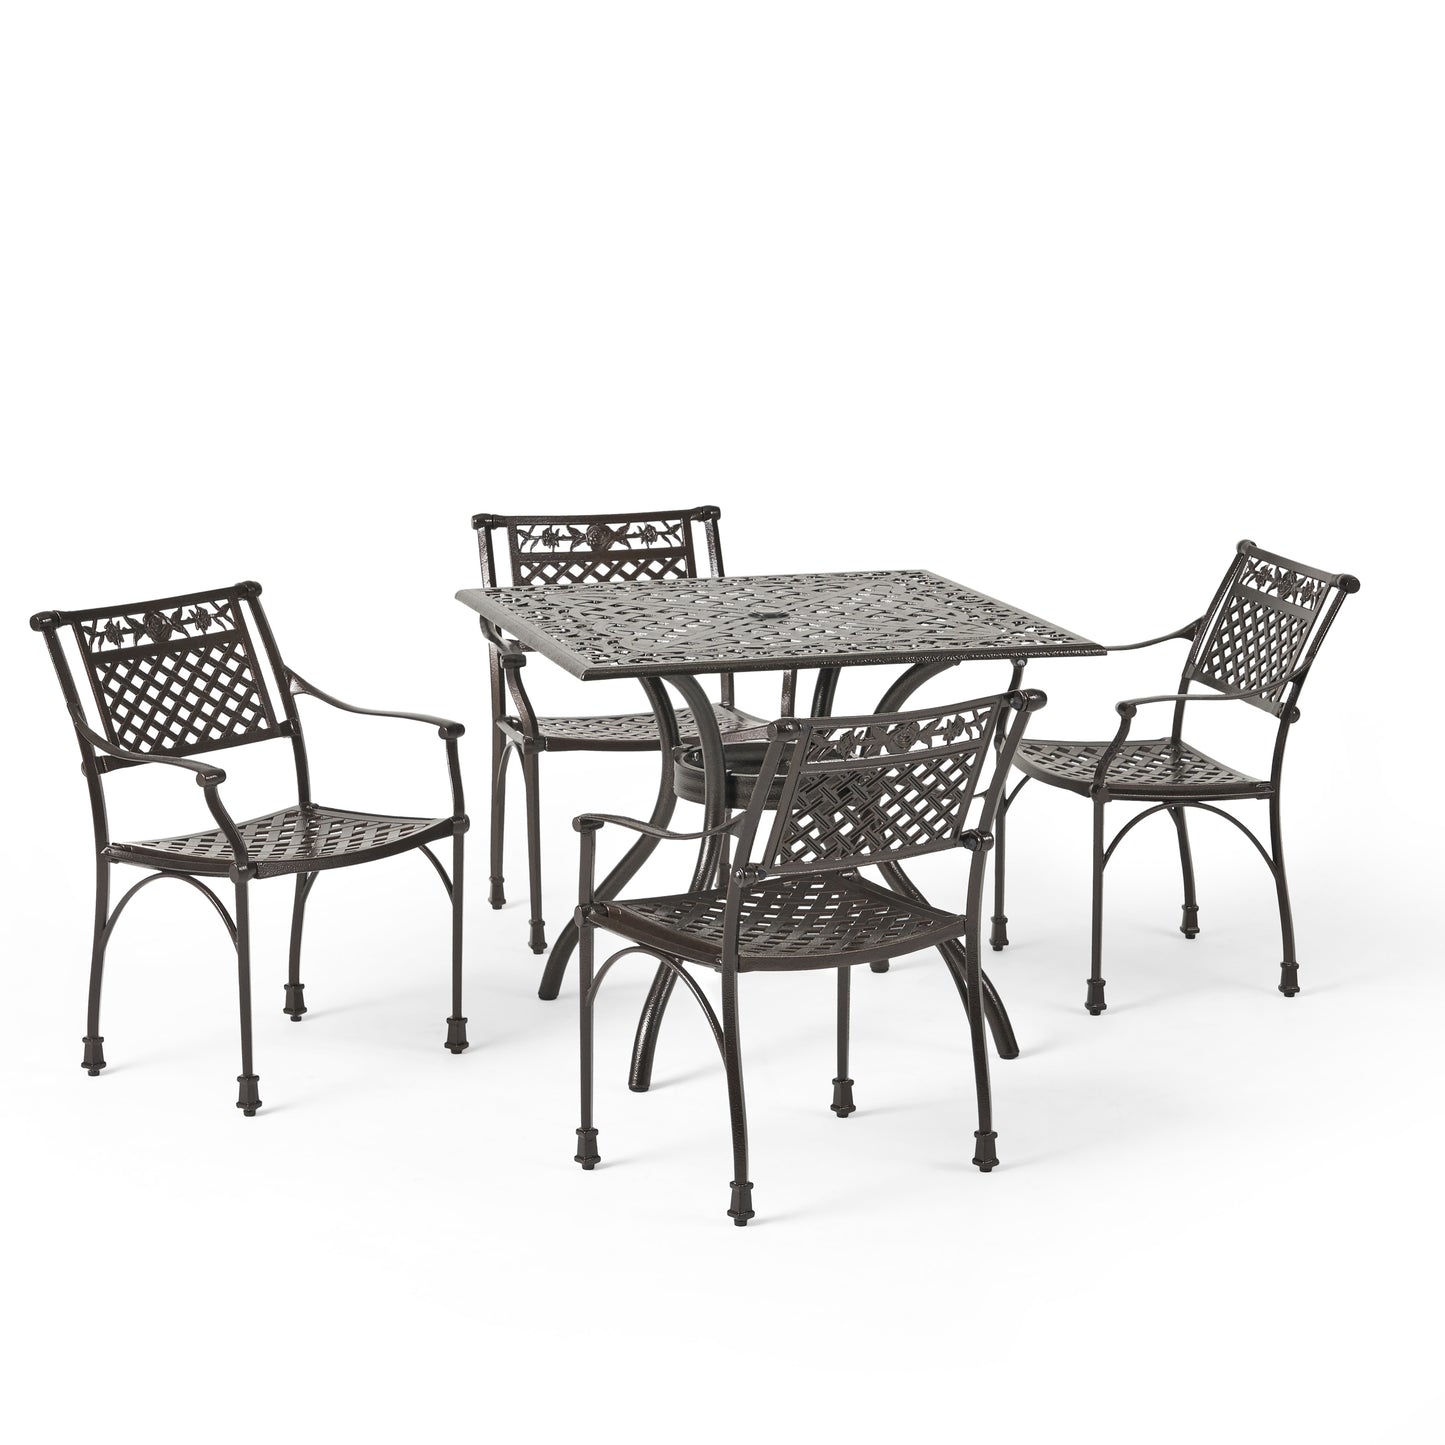 Mikell Traditional Outdoor Aluminum 5 Piece Dining Set with Square Table